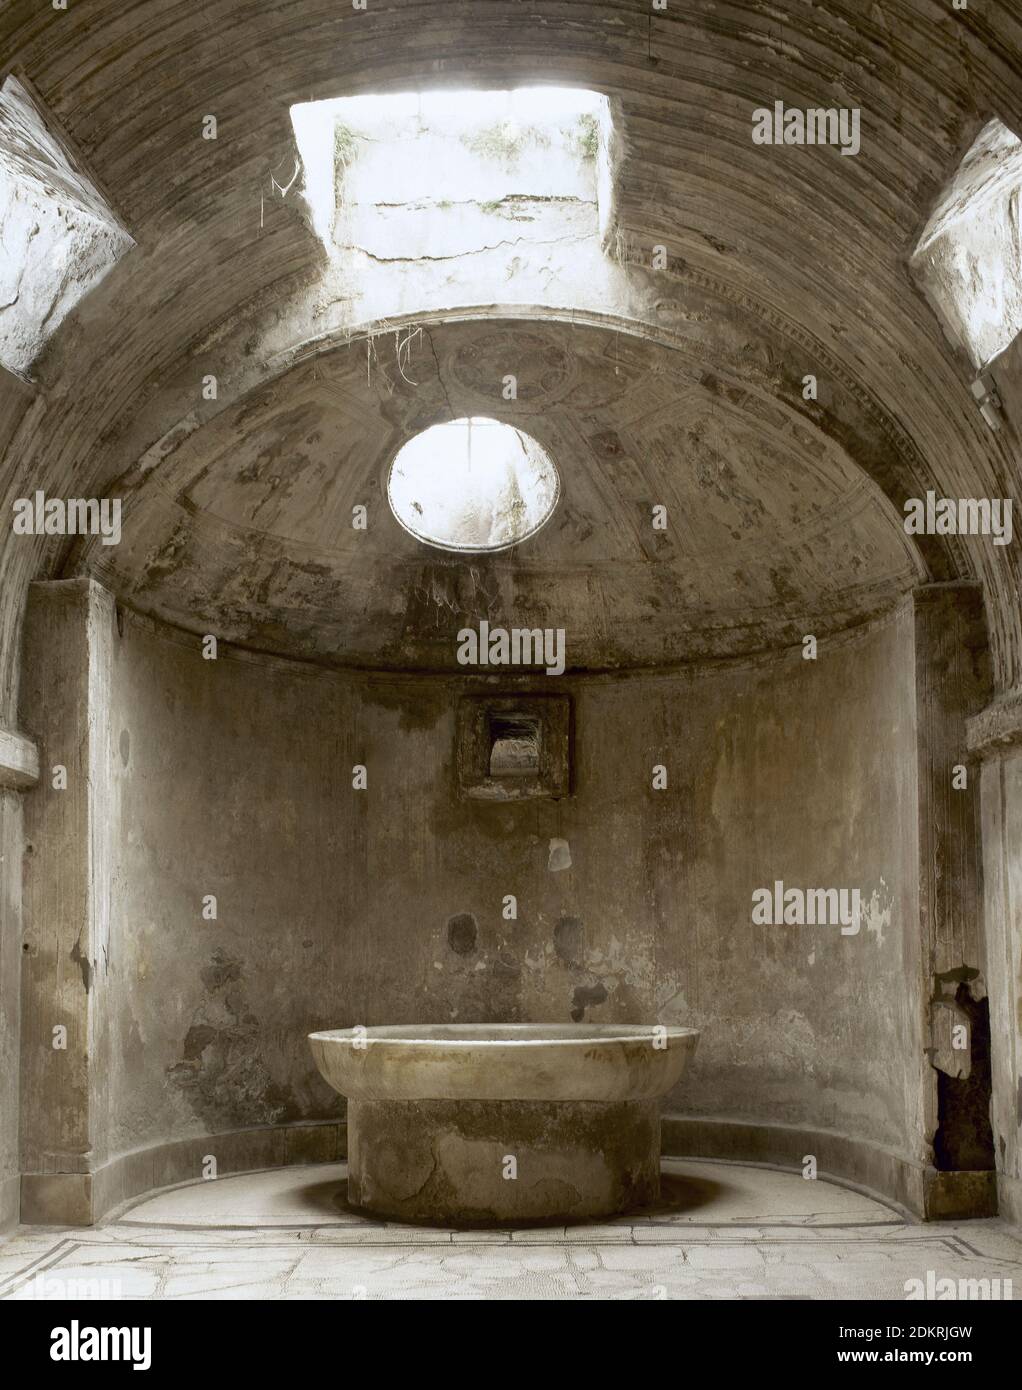 Italy, Pompeii. The Forum thermal baths. Public baths, edificated immediately after the founding of the colony (after 80 BC). They were subdivided into men’s and women’s section. Room of the 'calidarium' with its hot water bat. Basin which was filled with cold water so that bathers could cool off. Stock Photo